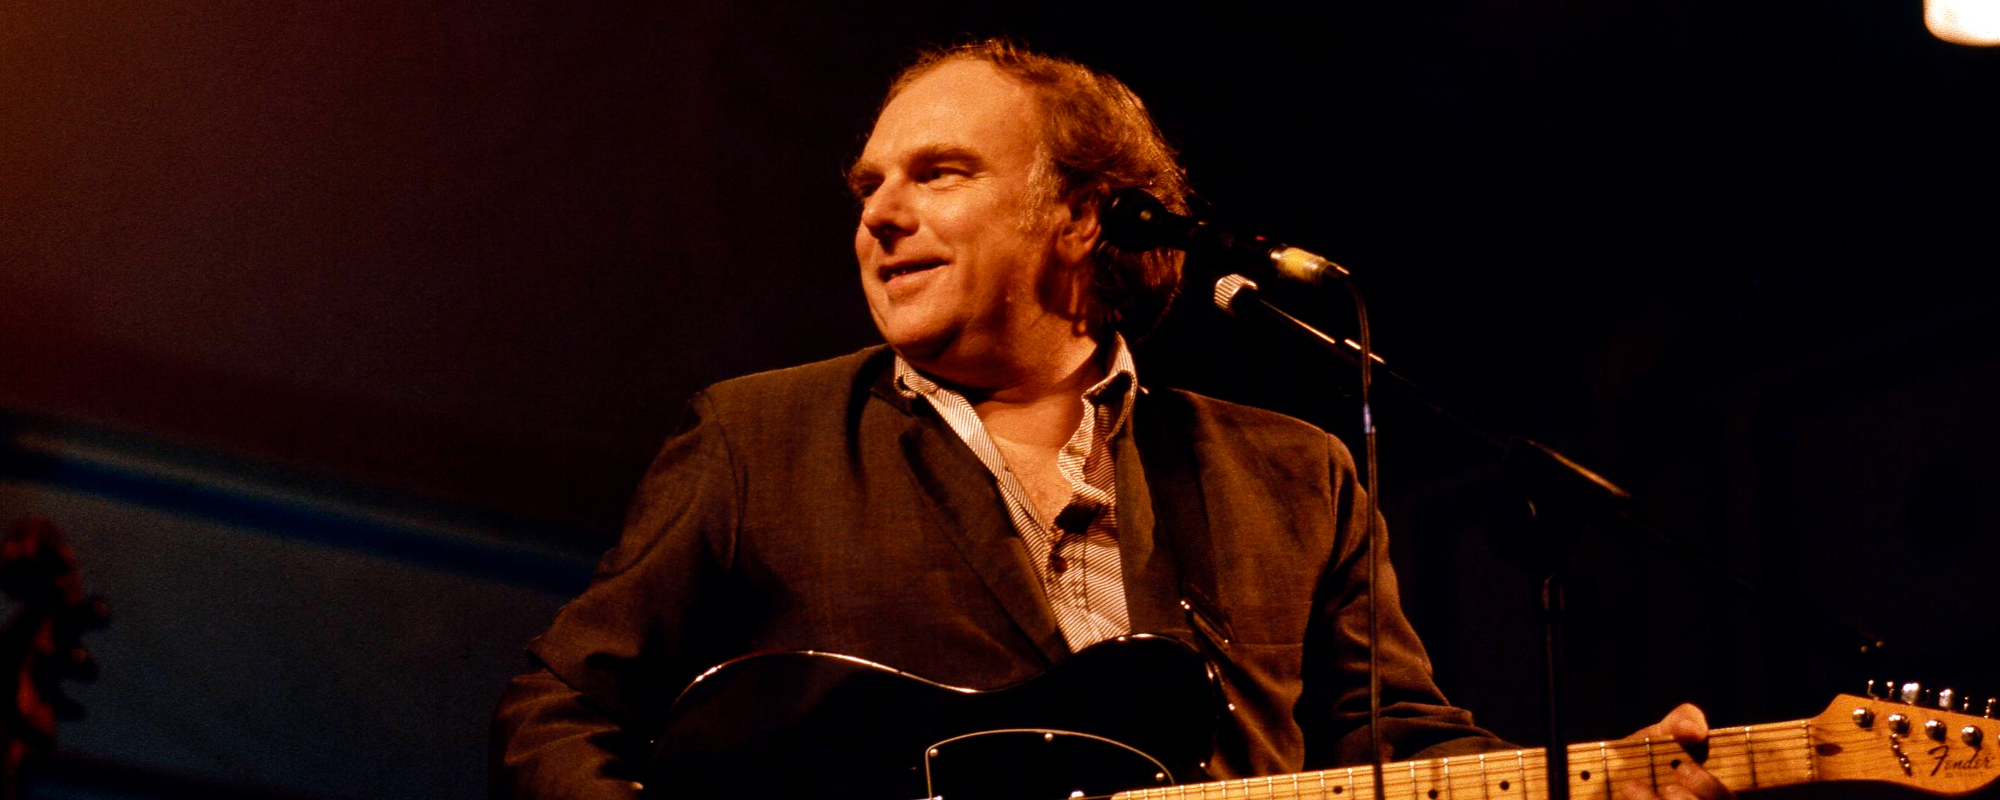 Despite Comparisons, Van Morrison Claims He and Bob Dylan Are “Worlds Apart”